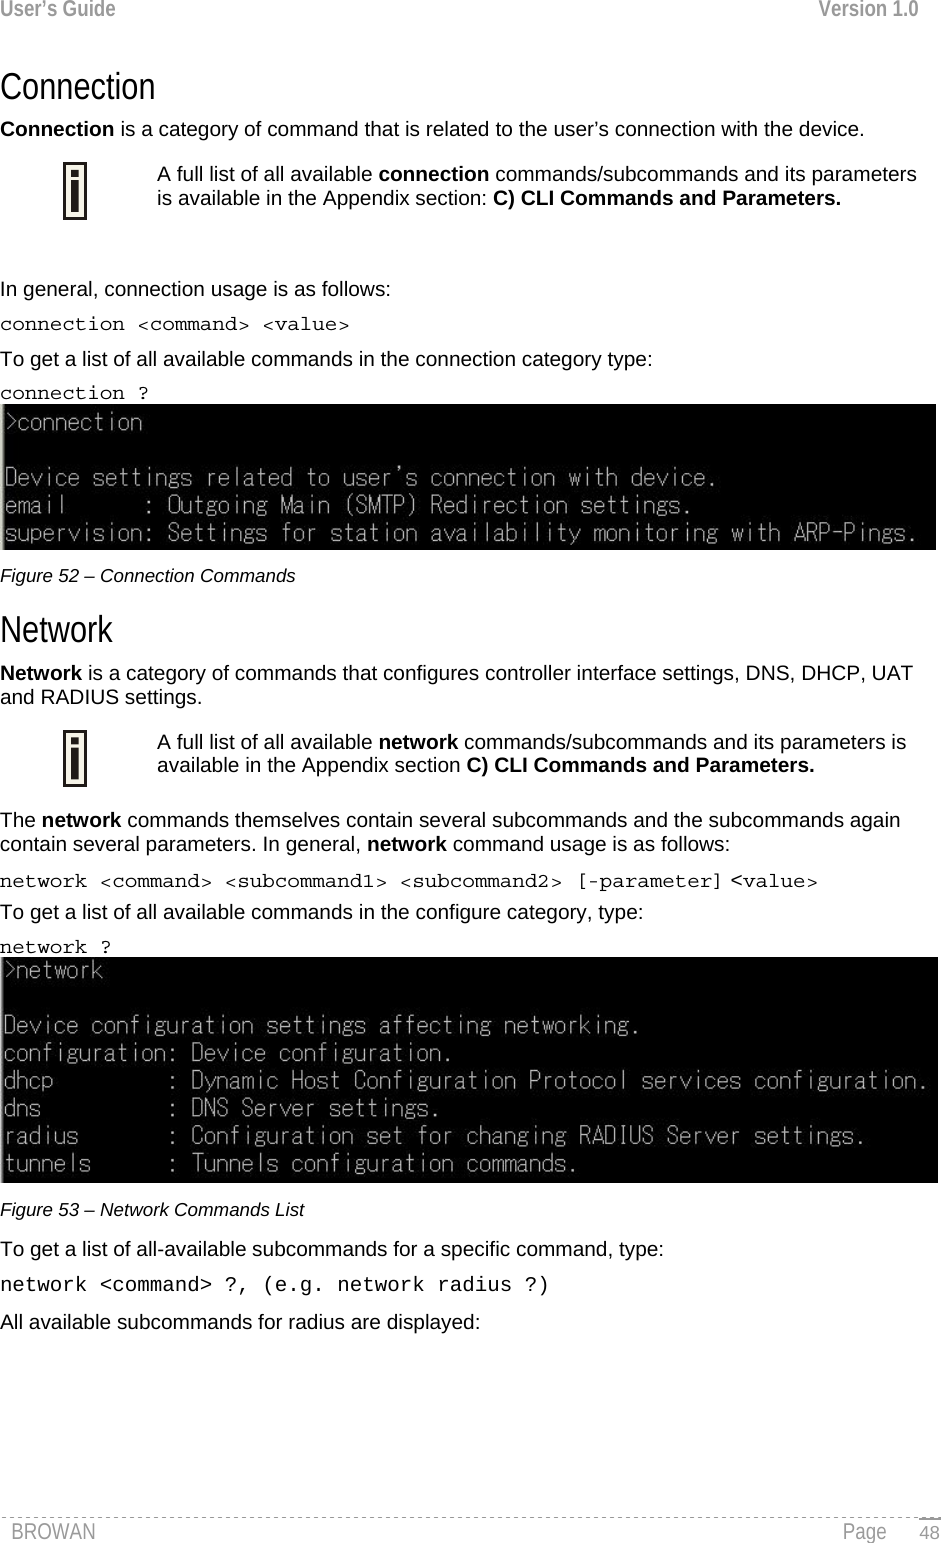 User’s Guide  Version 1.0  Connection  Connection is a category of command that is related to the user’s connection with the device. A full list of all available connection commands/subcommands and its parameters is available in the Appendix section: C) CLI Commands and Parameters.   In general, connection usage is as follows:  connection &lt;command&gt; &lt;value&gt; To get a list of all available commands in the connection category type:  connection ?  Figure 52 – Connection Commands Network  Network is a category of commands that configures controller interface settings, DNS, DHCP, UAT and RADIUS settings. A full list of all available network commands/subcommands and its parameters is available in the Appendix section C) CLI Commands and Parameters.  The network commands themselves contain several subcommands and the subcommands again contain several parameters. In general, network command usage is as follows:  network &lt;command&gt; &lt;subcommand1&gt; &lt;subcommand2&gt; [-parameter] &lt;value&gt; To get a list of all available commands in the configure category, type:  network ?  Figure 53 – Network Commands List To get a list of all-available subcommands for a specific command, type:  network &lt;command&gt; ?, (e.g. network radius ?) All available subcommands for radius are displayed: BROWAN                                                                                                                                               Page   48